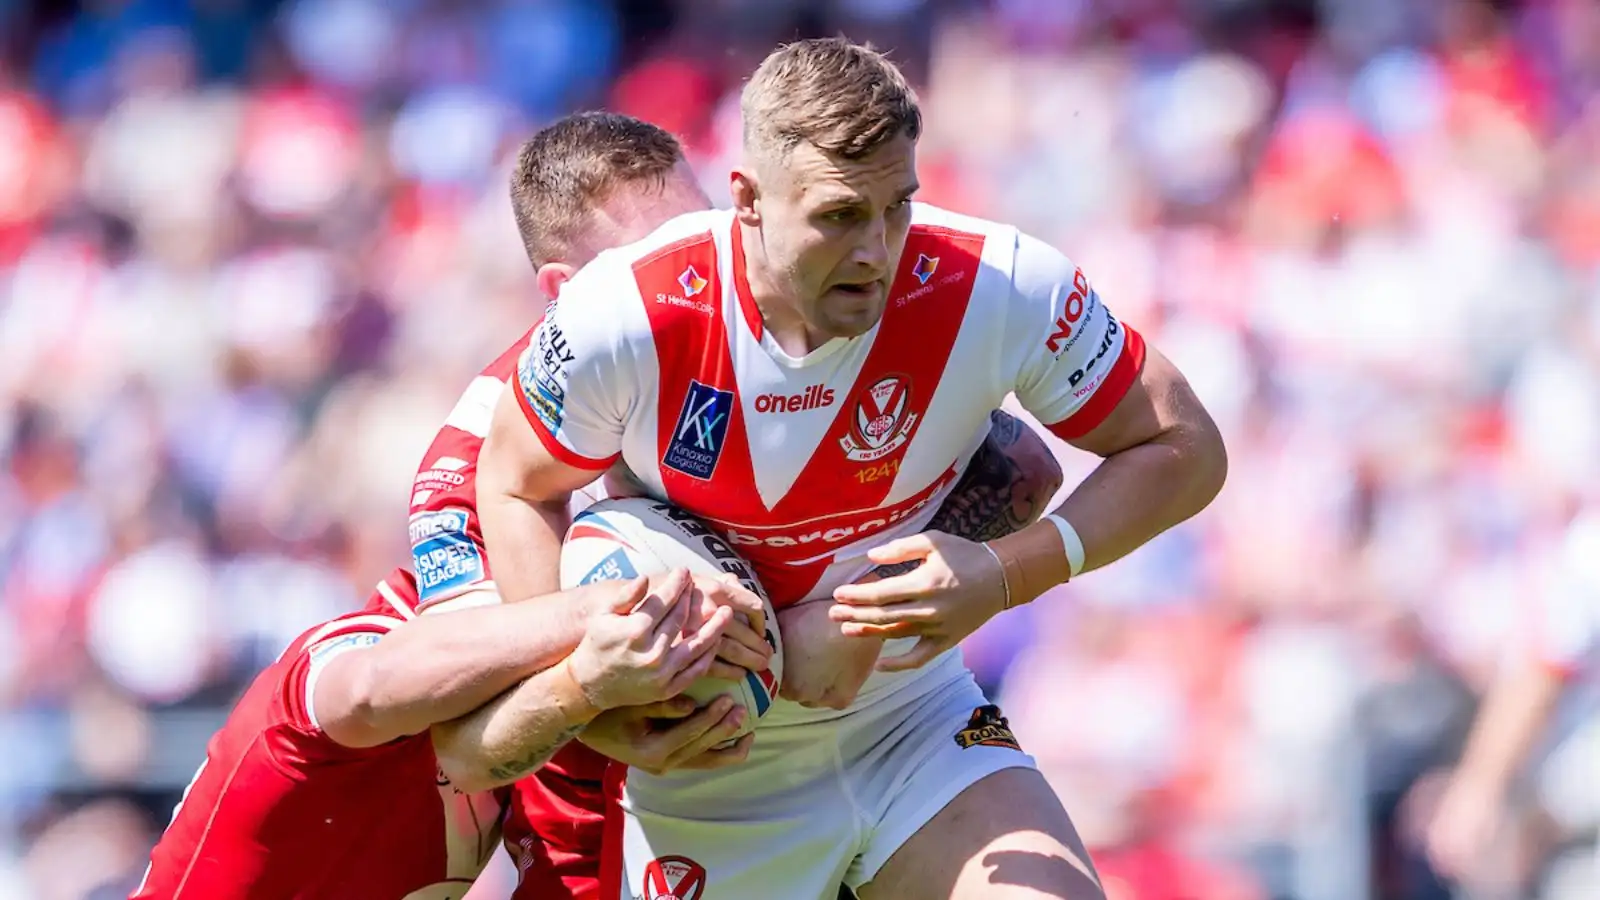 St Helens forward Matty Lees handed suspension after pleading guilty